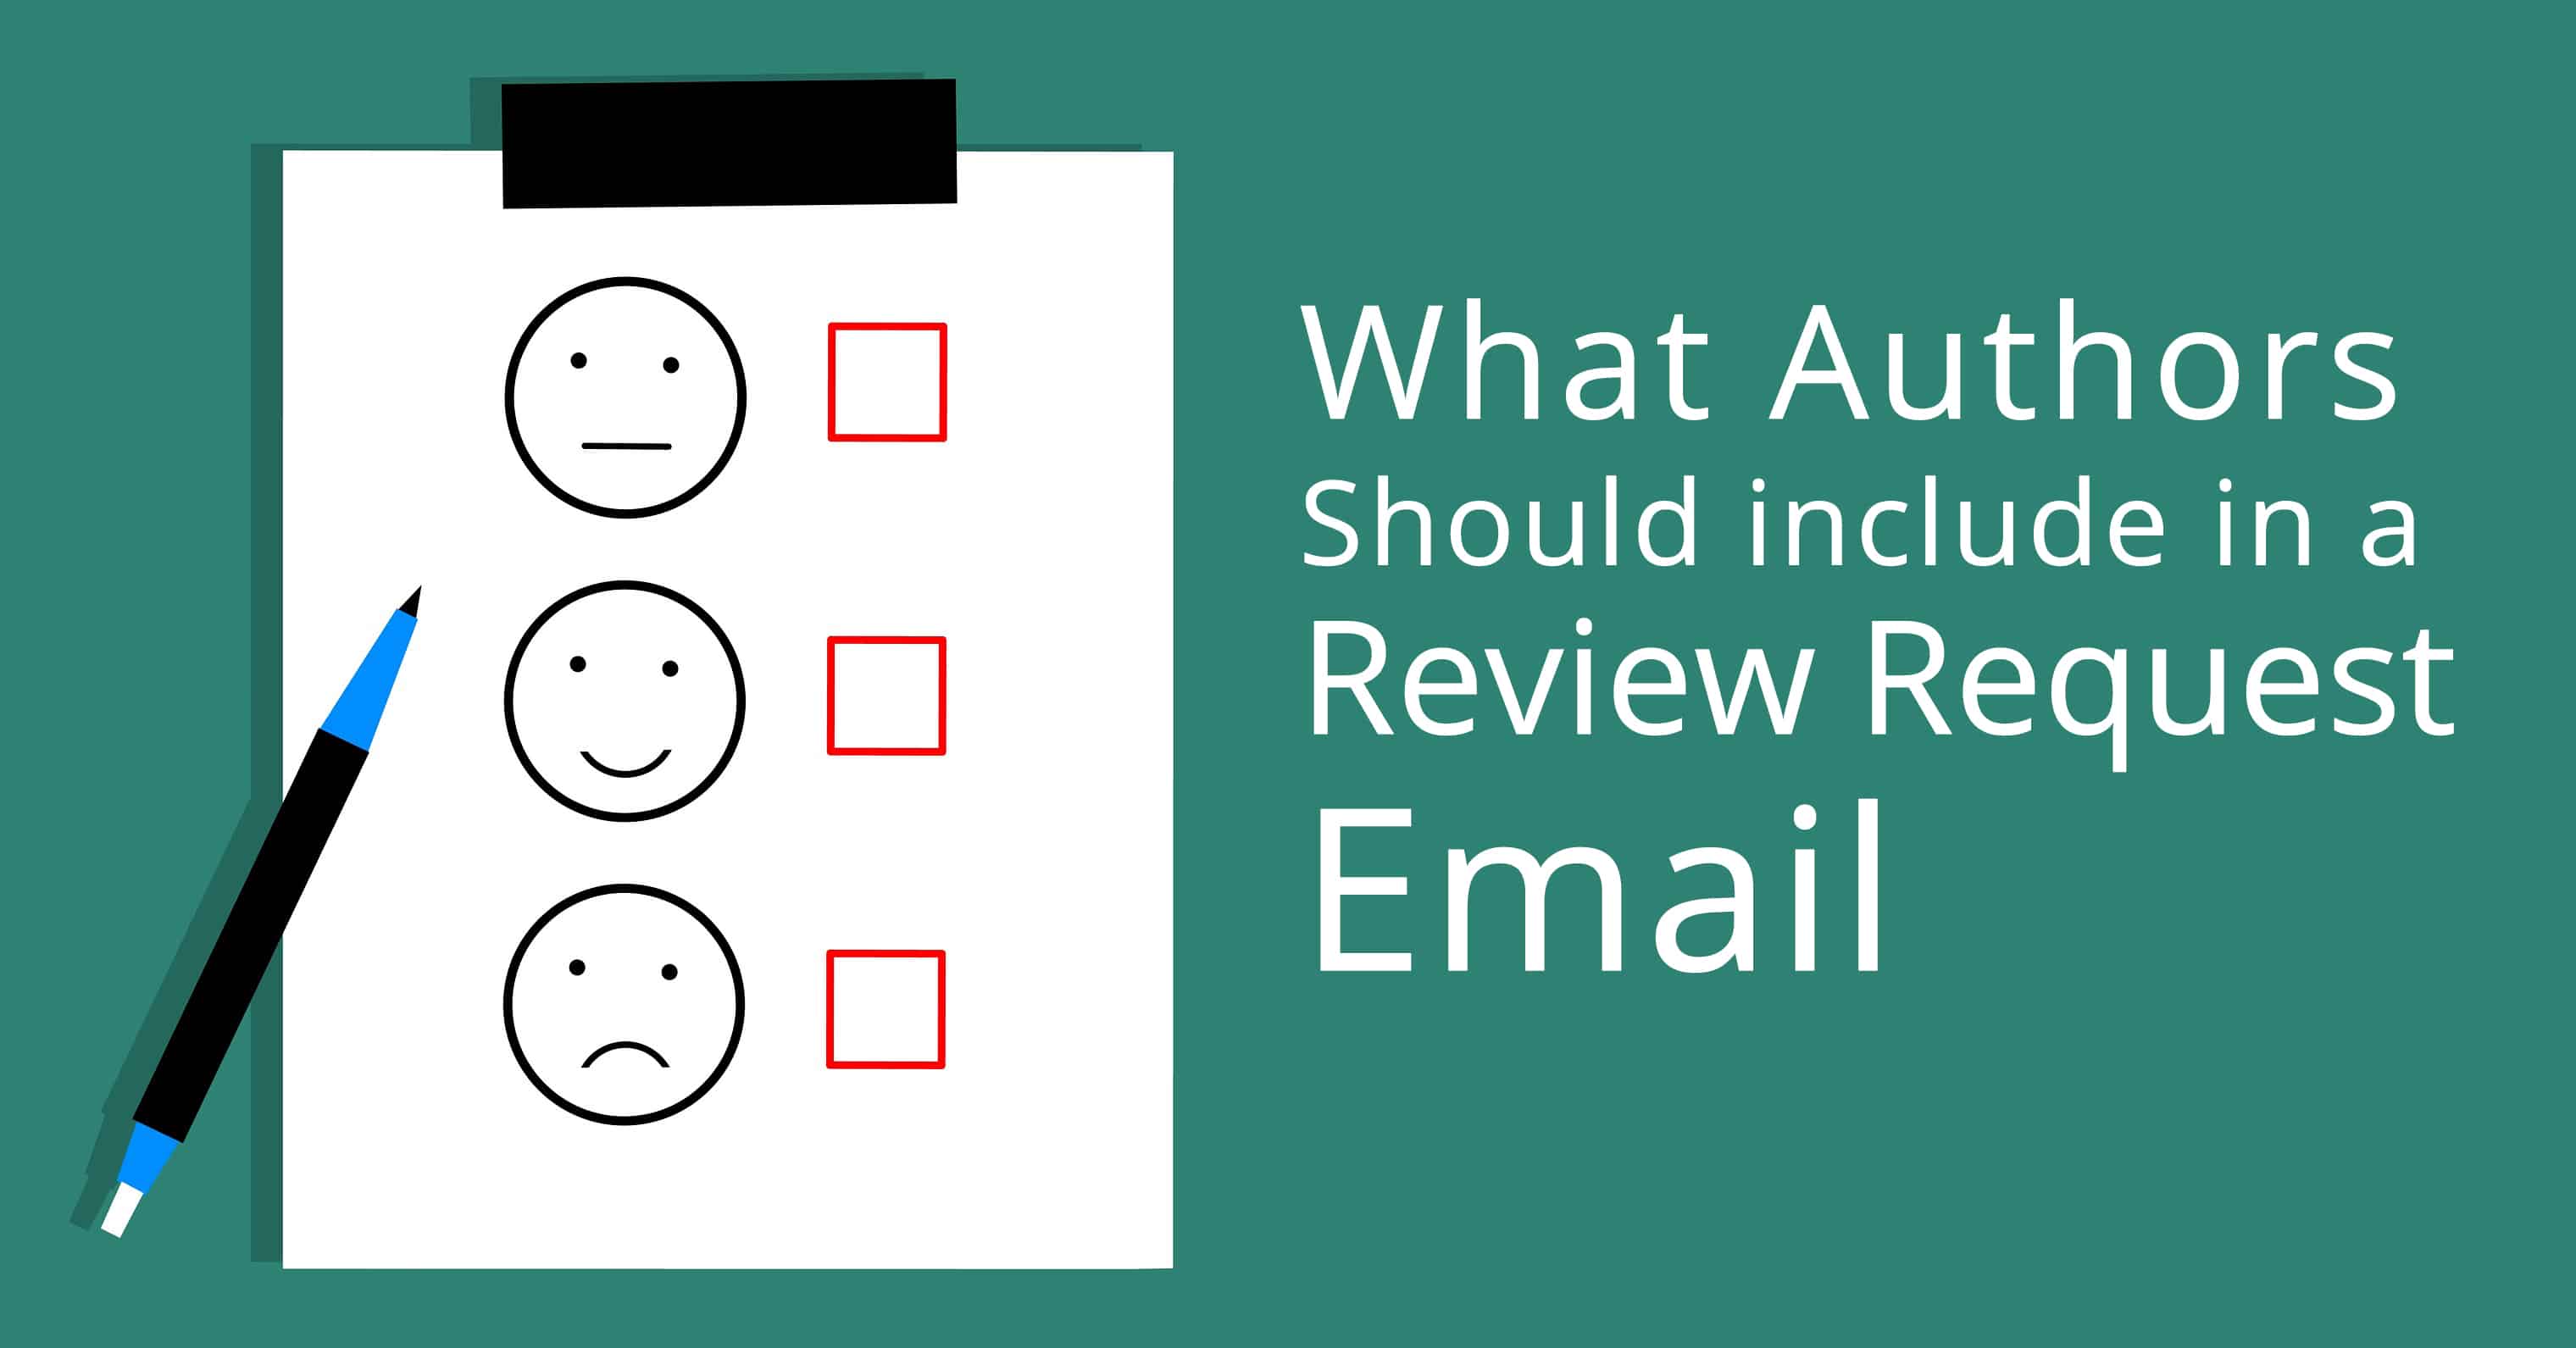 What Authors Should include in a Review Request Email